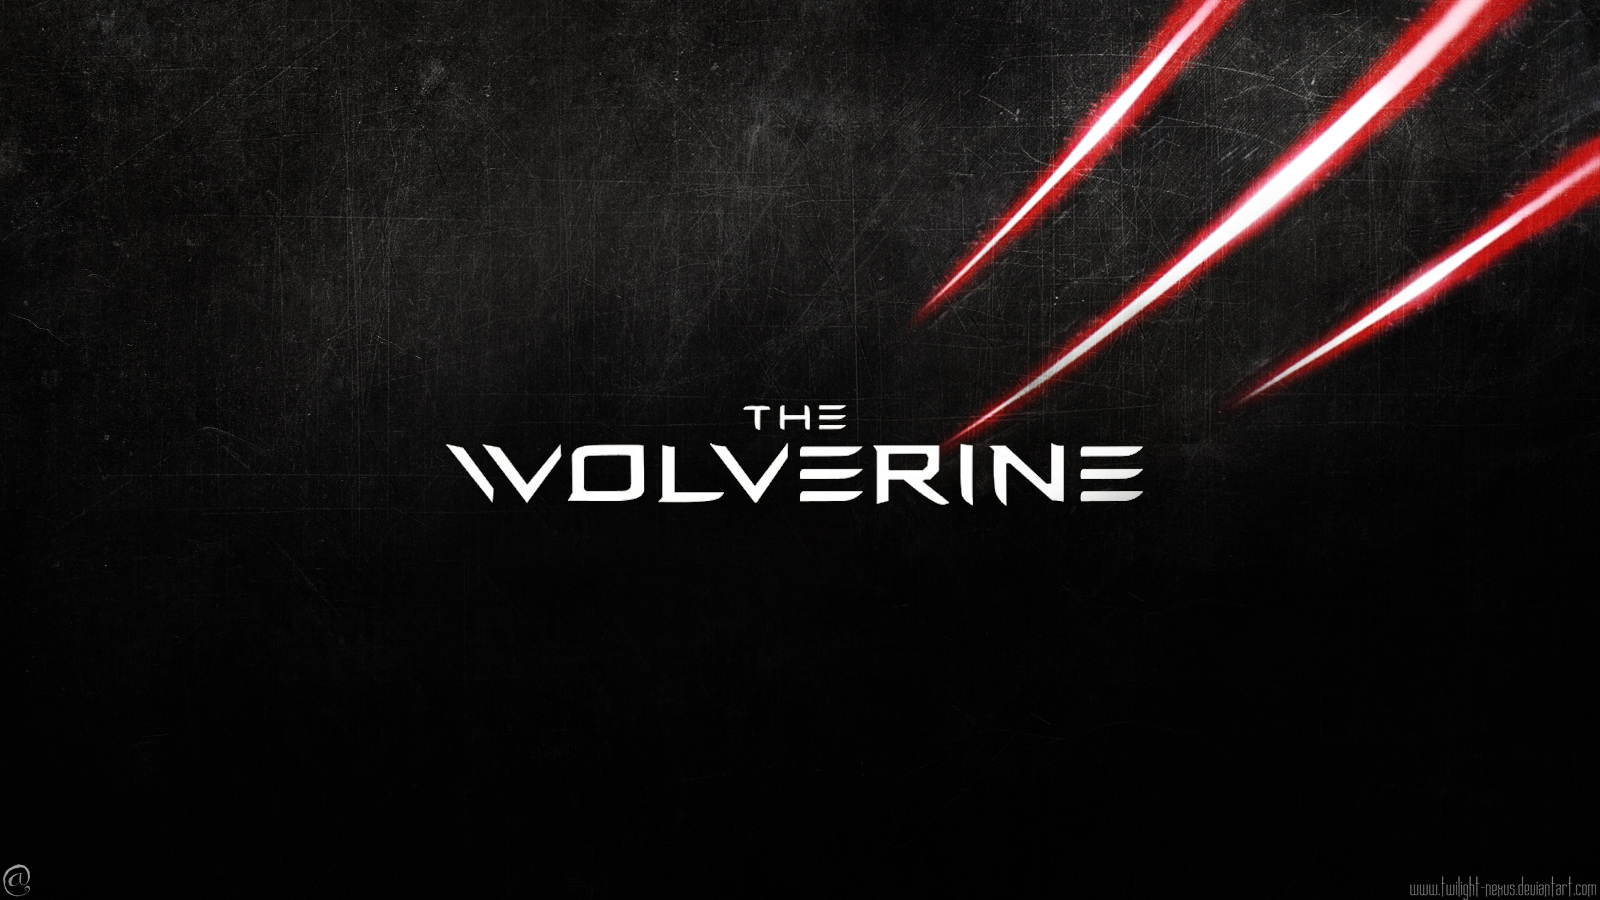 The Wolverine Wallpaper By Twilight Nexus HD Wallpaper For Pc